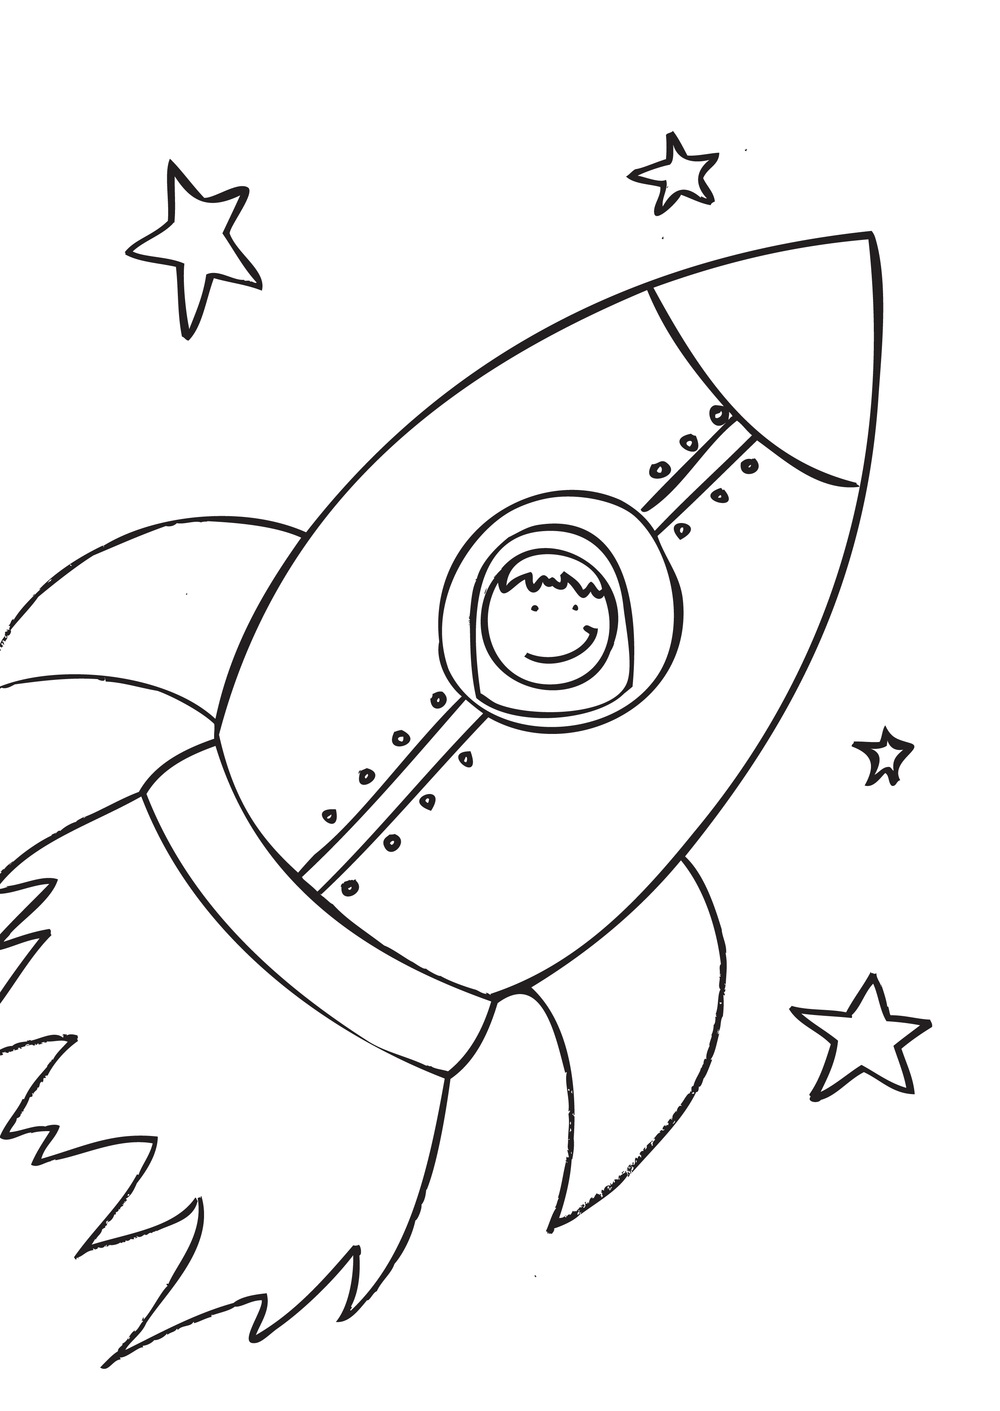 Rocket ship isolated coloring page for kids Vector Image